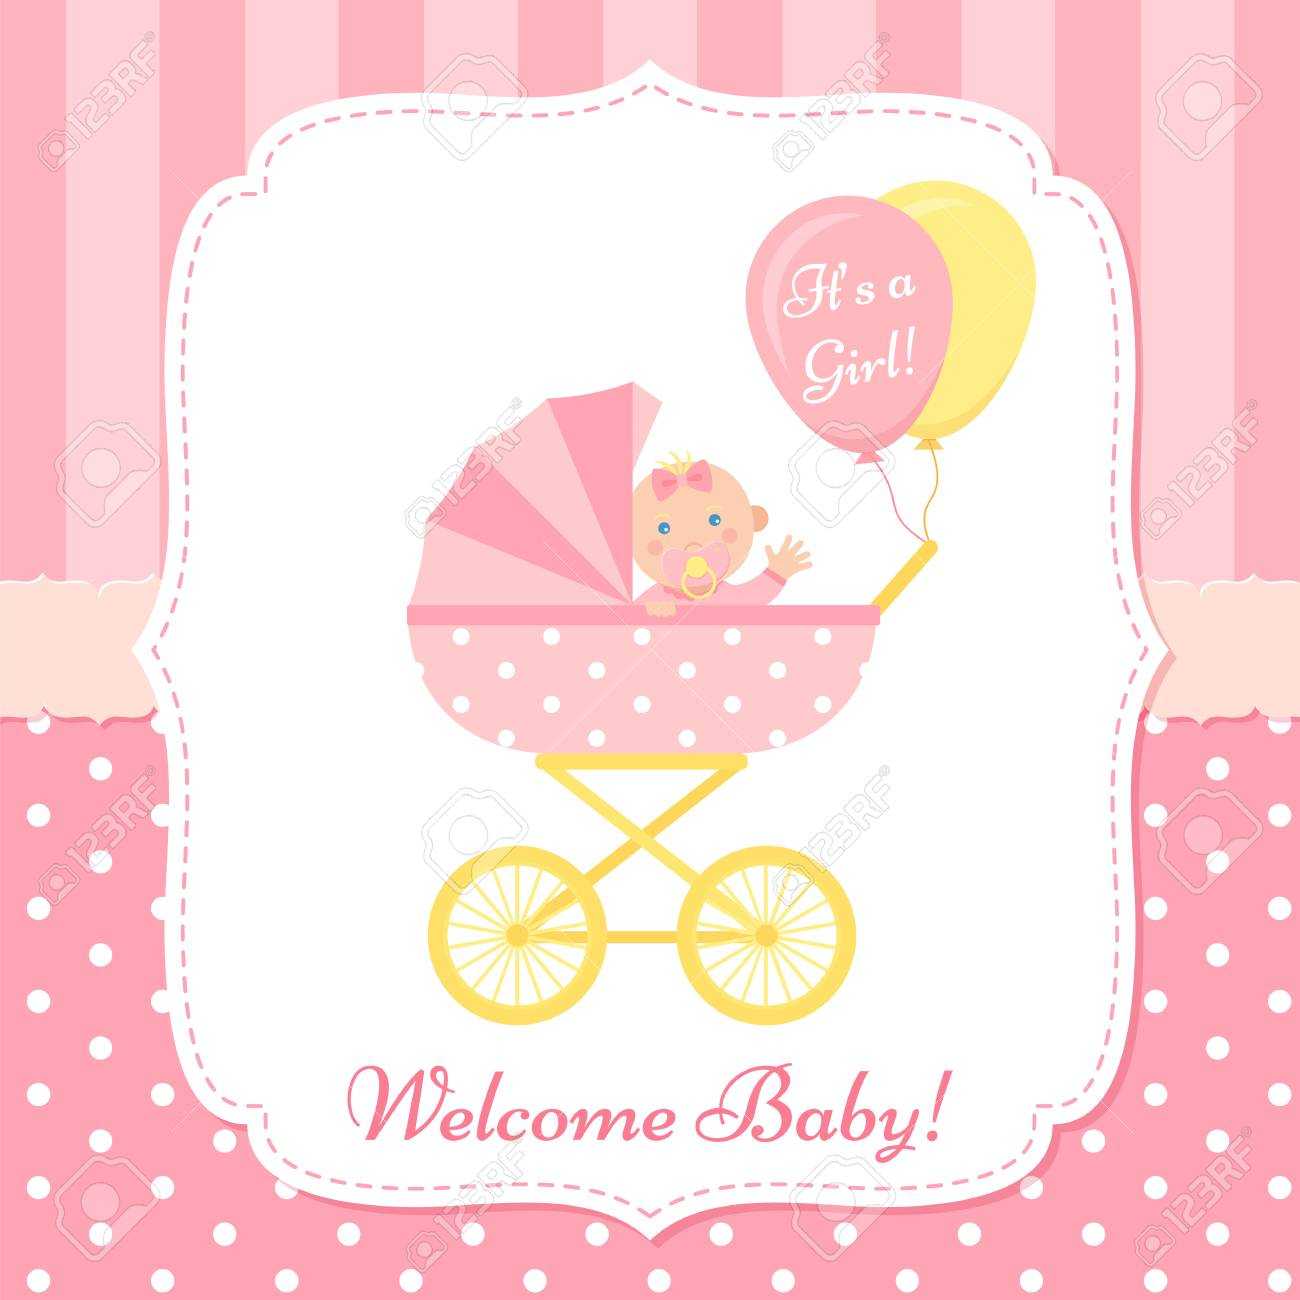 Baby Girl Invite Card. Vector. Baby Shower Banner. Pink Design.. Pertaining To Baby Shower Banner Template